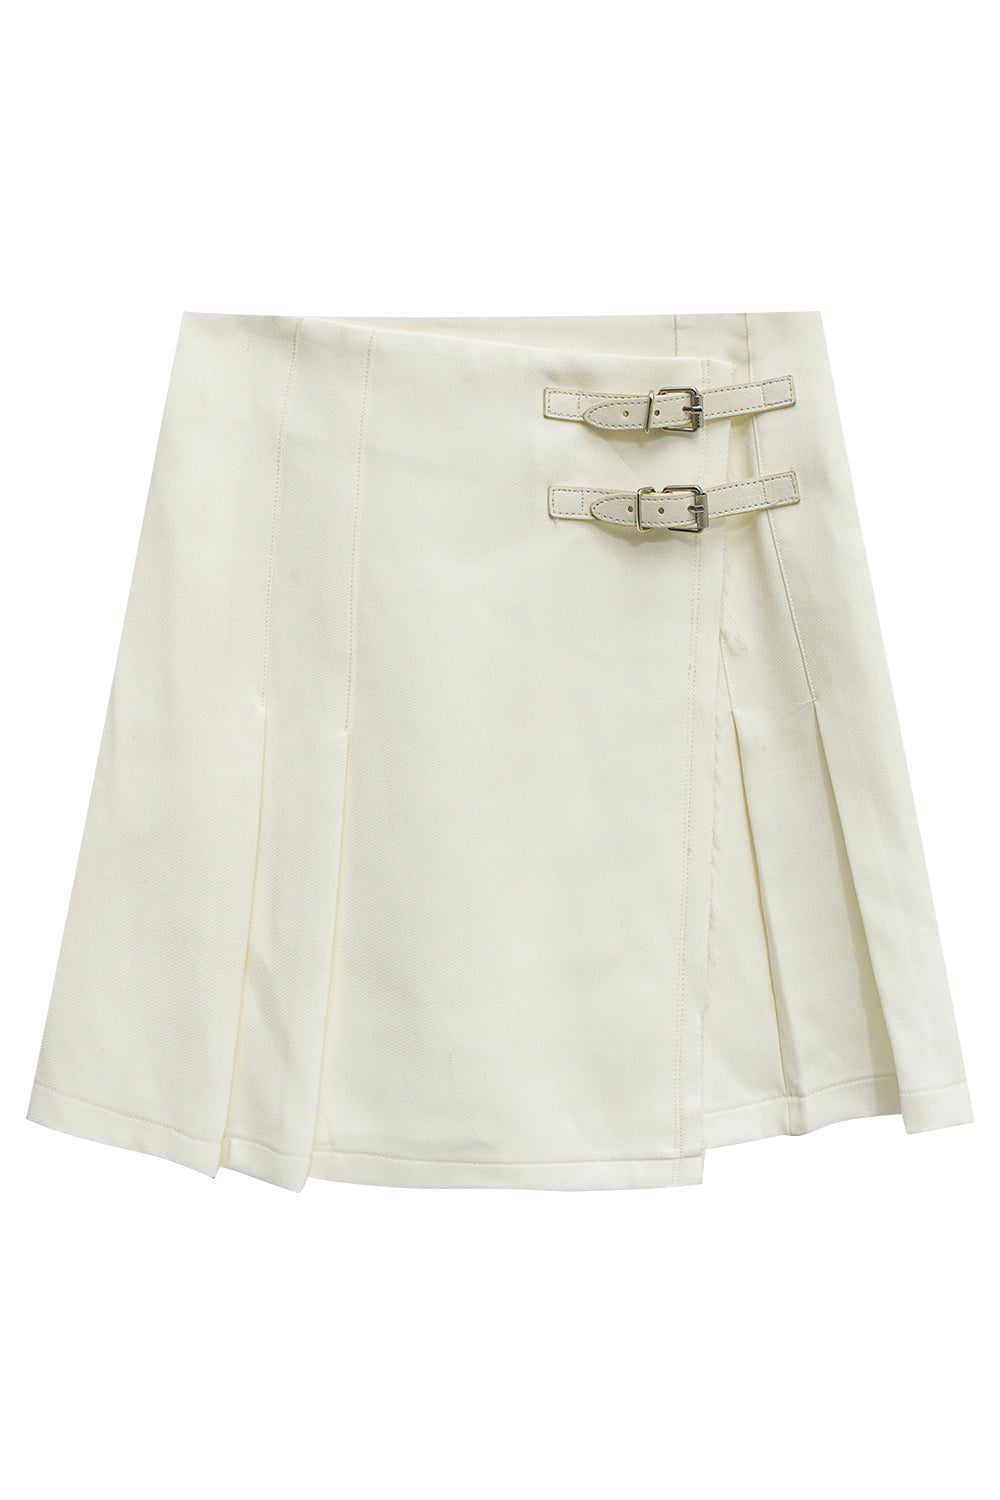 Woman's A-Line Mini Skirt with Buckle Accents and Structured Waistband